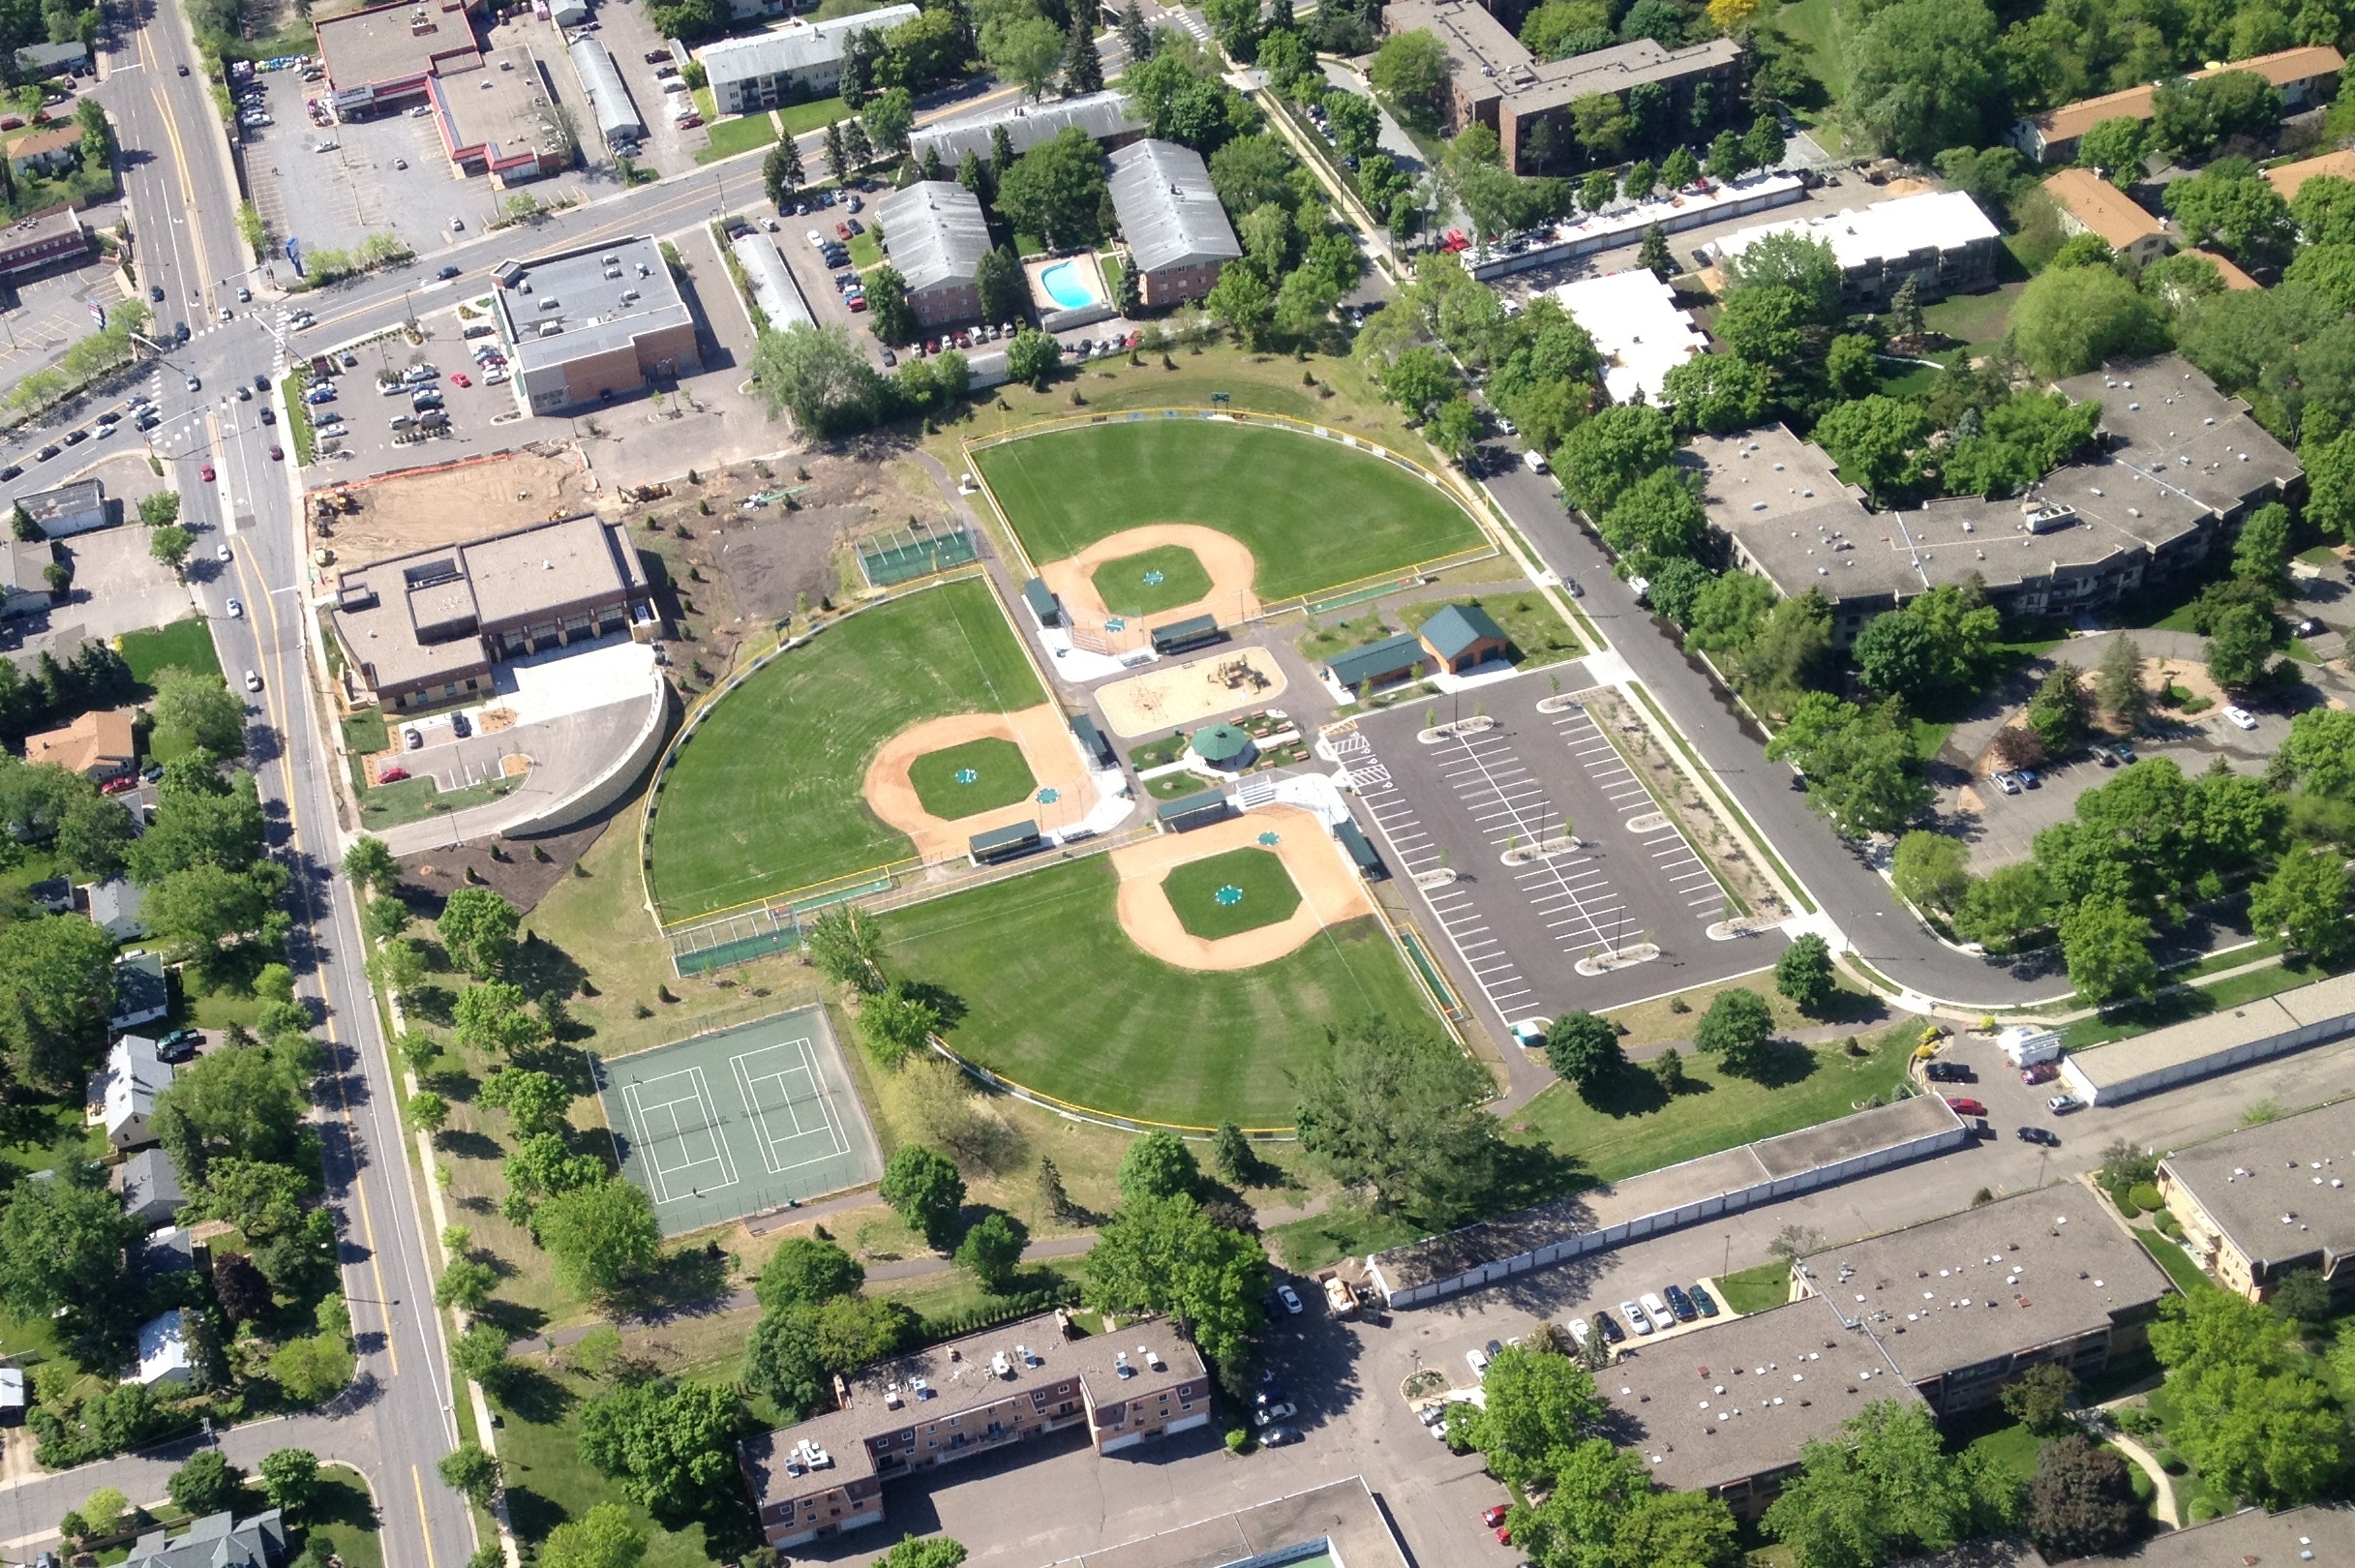 Aerial view of baseball fields